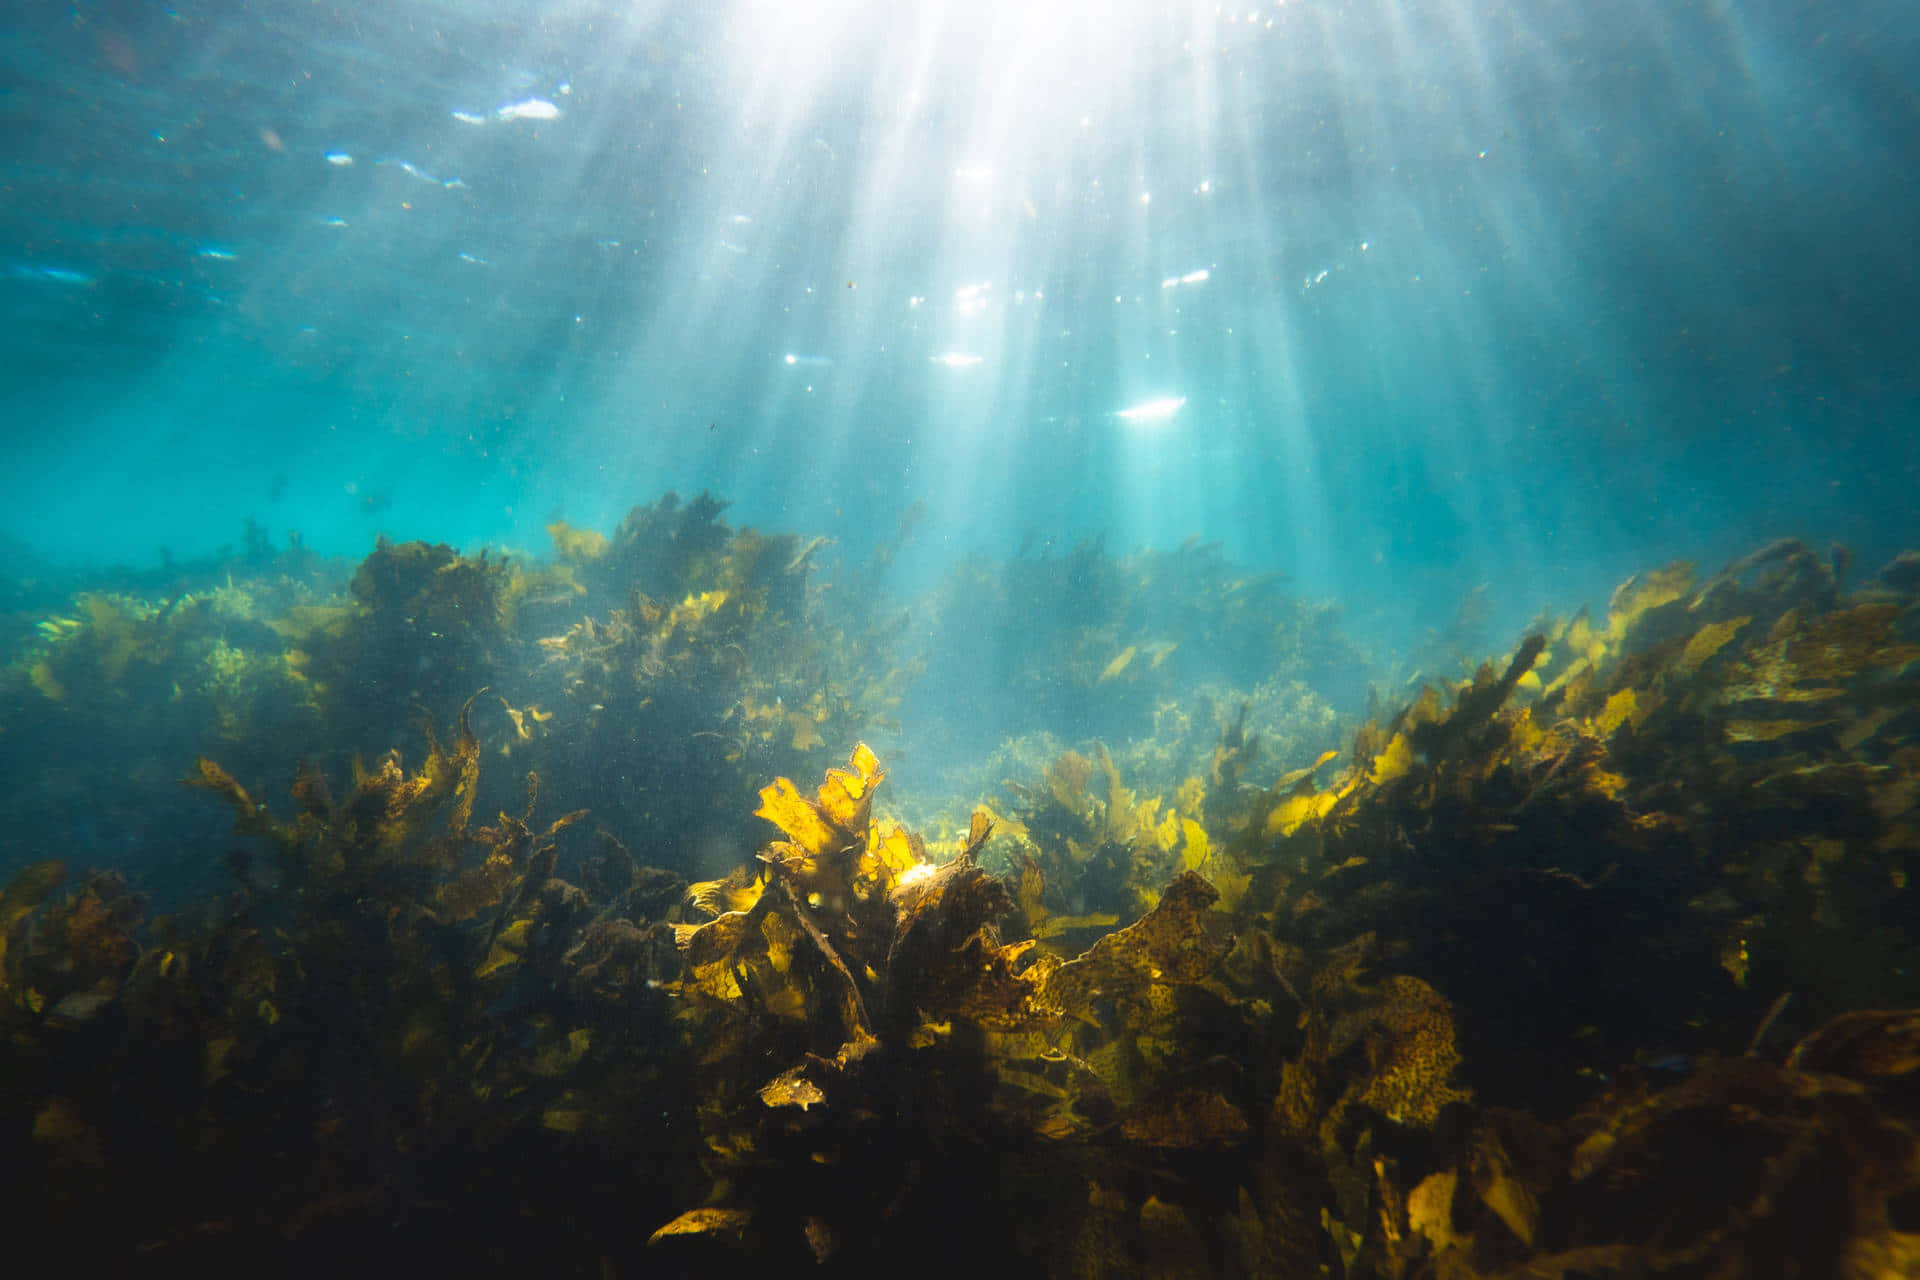 A beautiful underwater scene with glimmering light